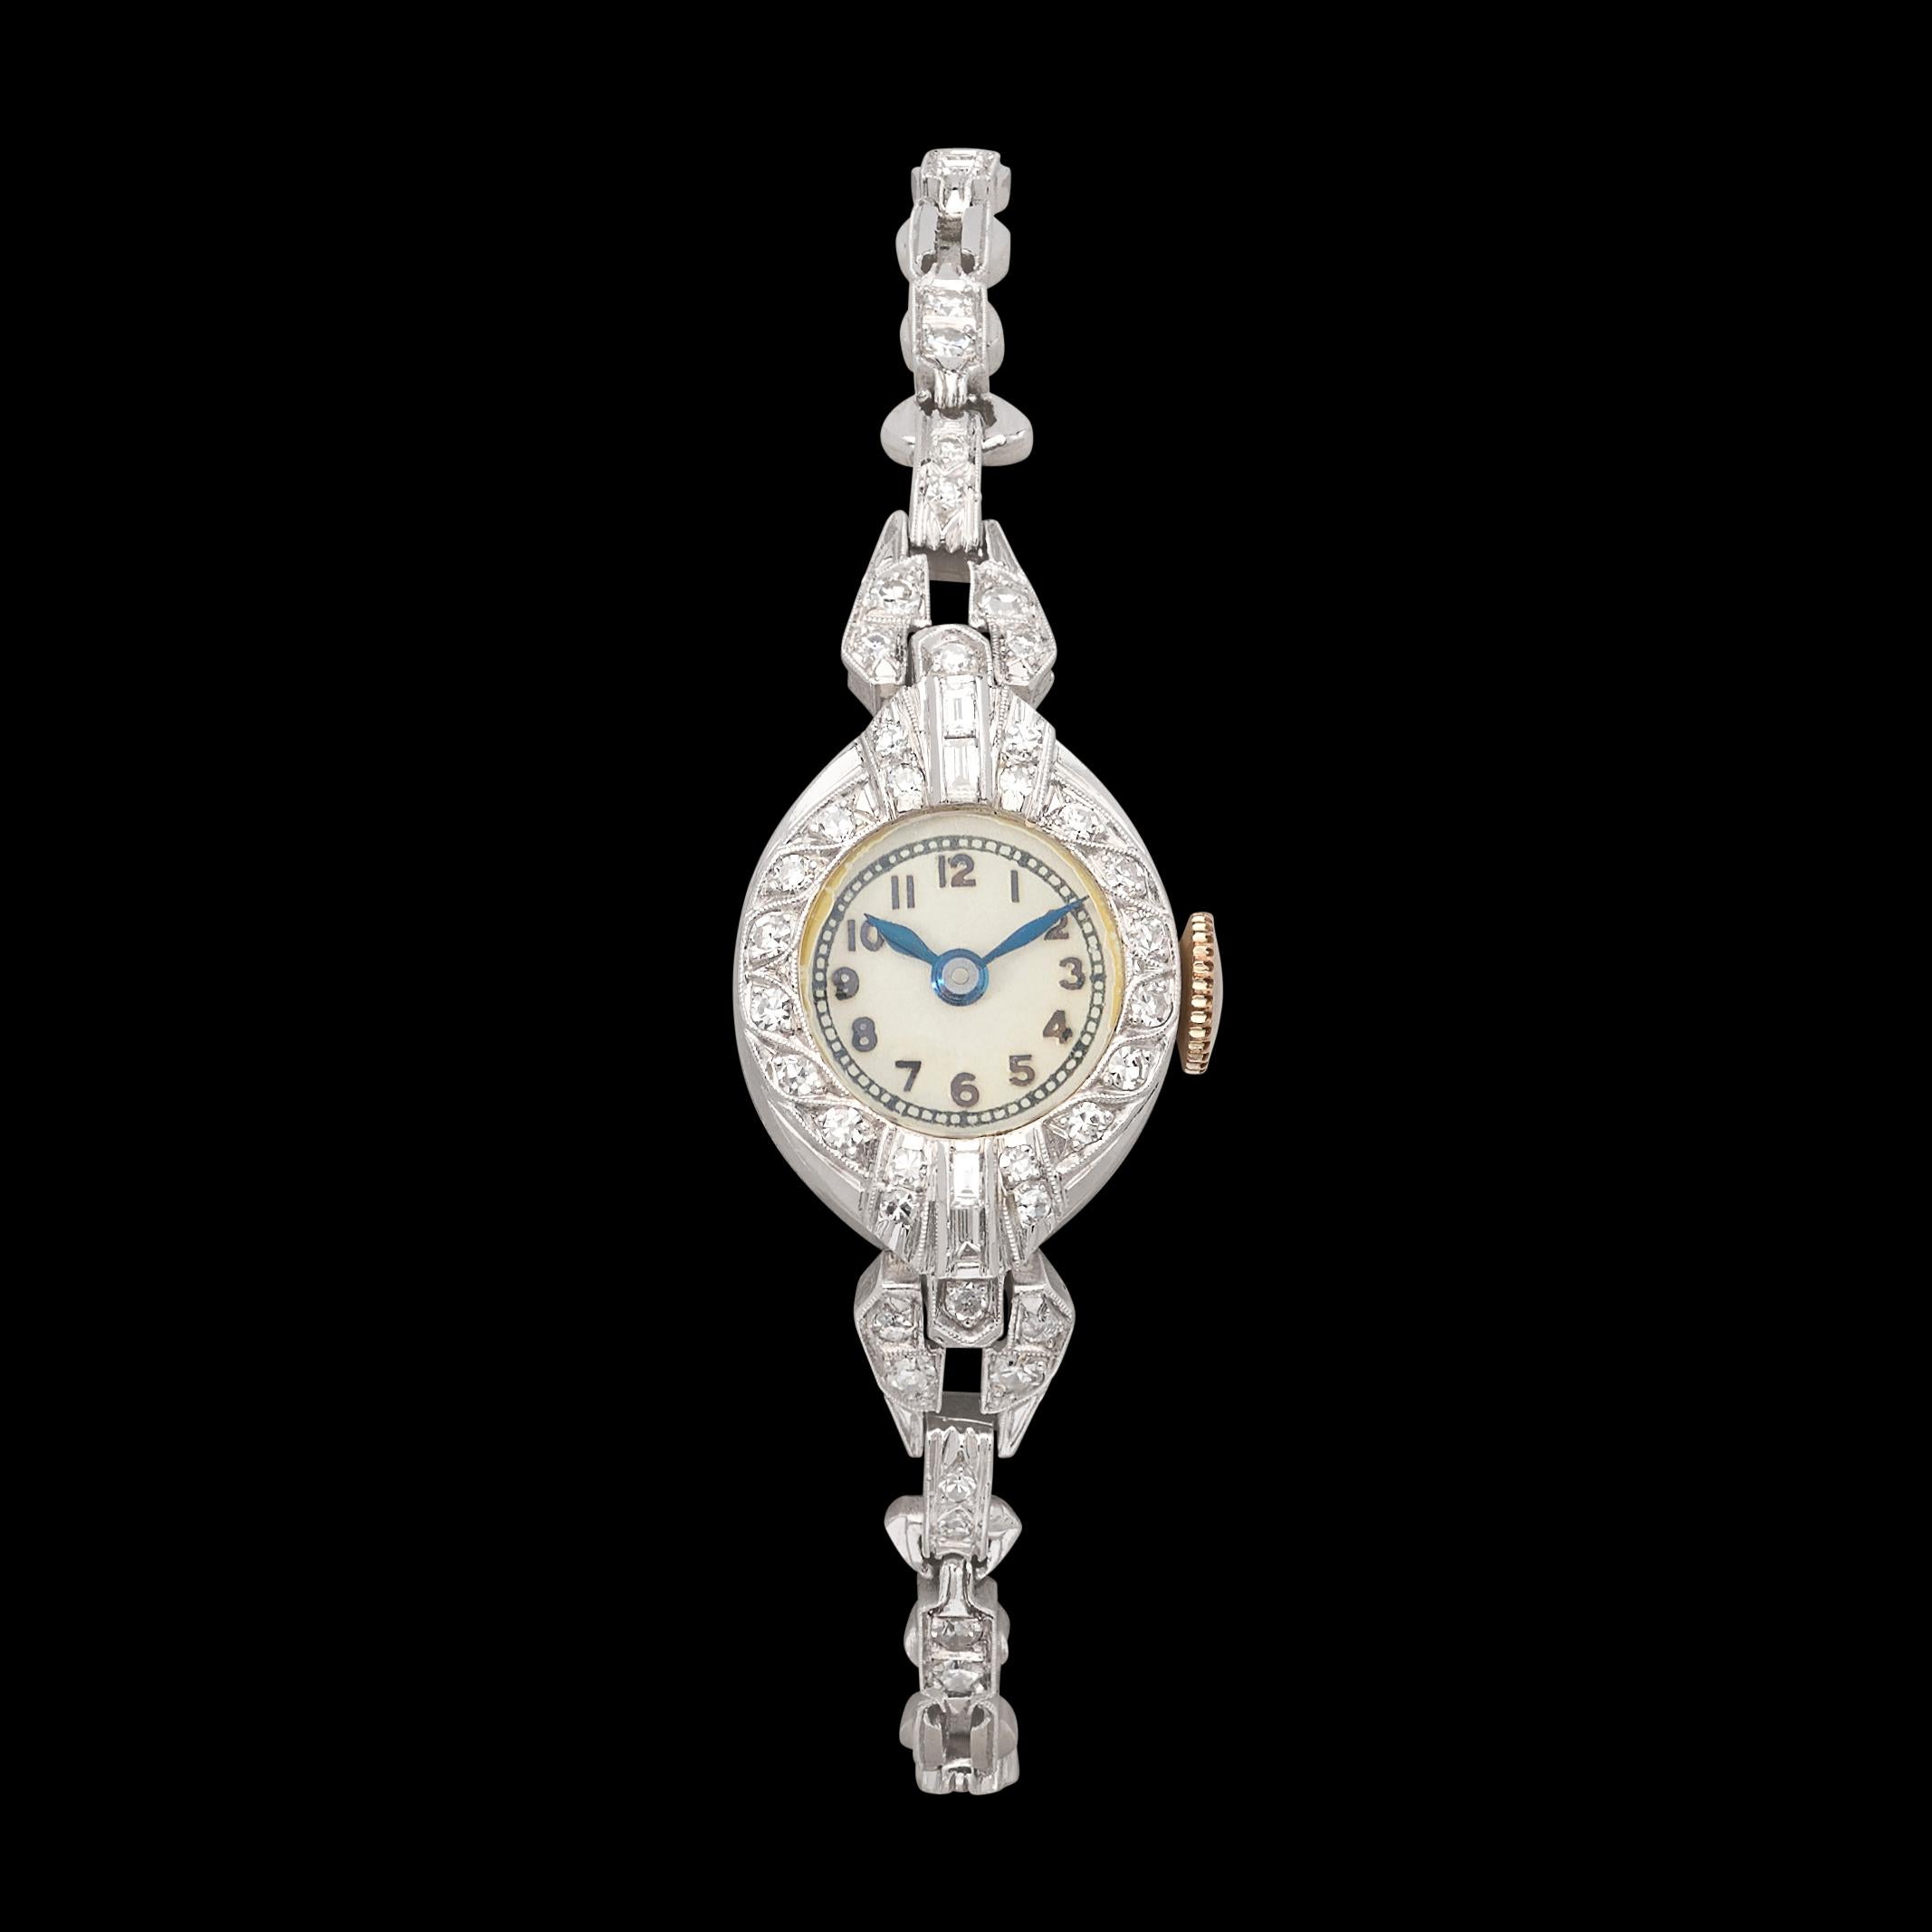 One can almost feel the stories that this watch carries from being passed down through the years. This beautiful antique platinum diamond watch features approximately 52 sparkling diamonds for 0.80 carats. The watch is still in good working order